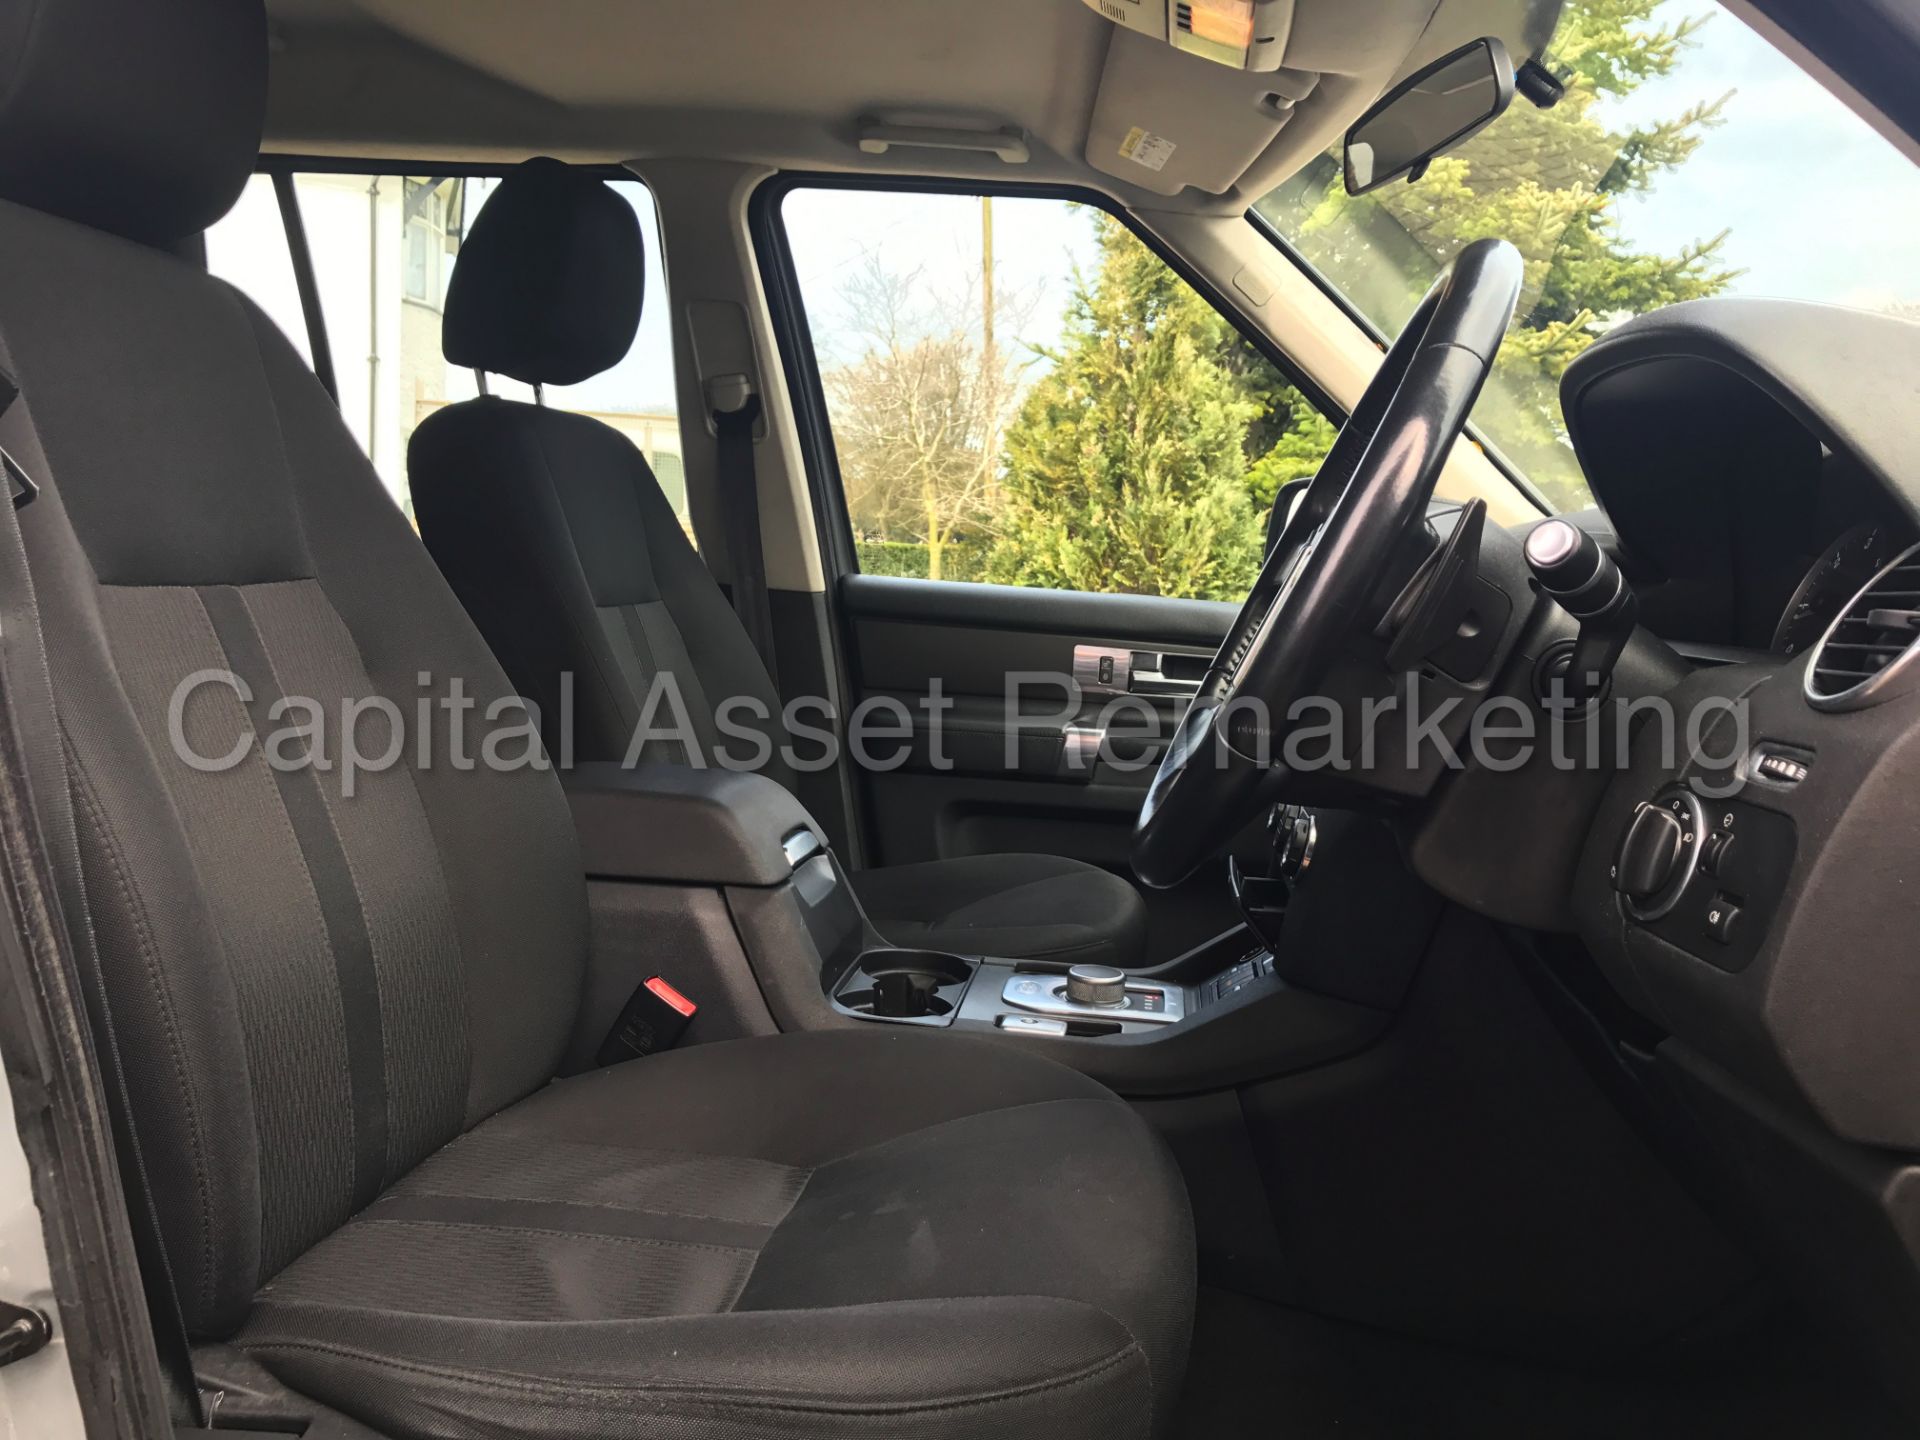 LAND ROVER DISCOVERY 4 (2014 MODEL) '3.0 SDV6 - 8 SPEED AUTO - 7 SEATER' **HUGE SPEC** (1 OWNER) - Image 28 of 30